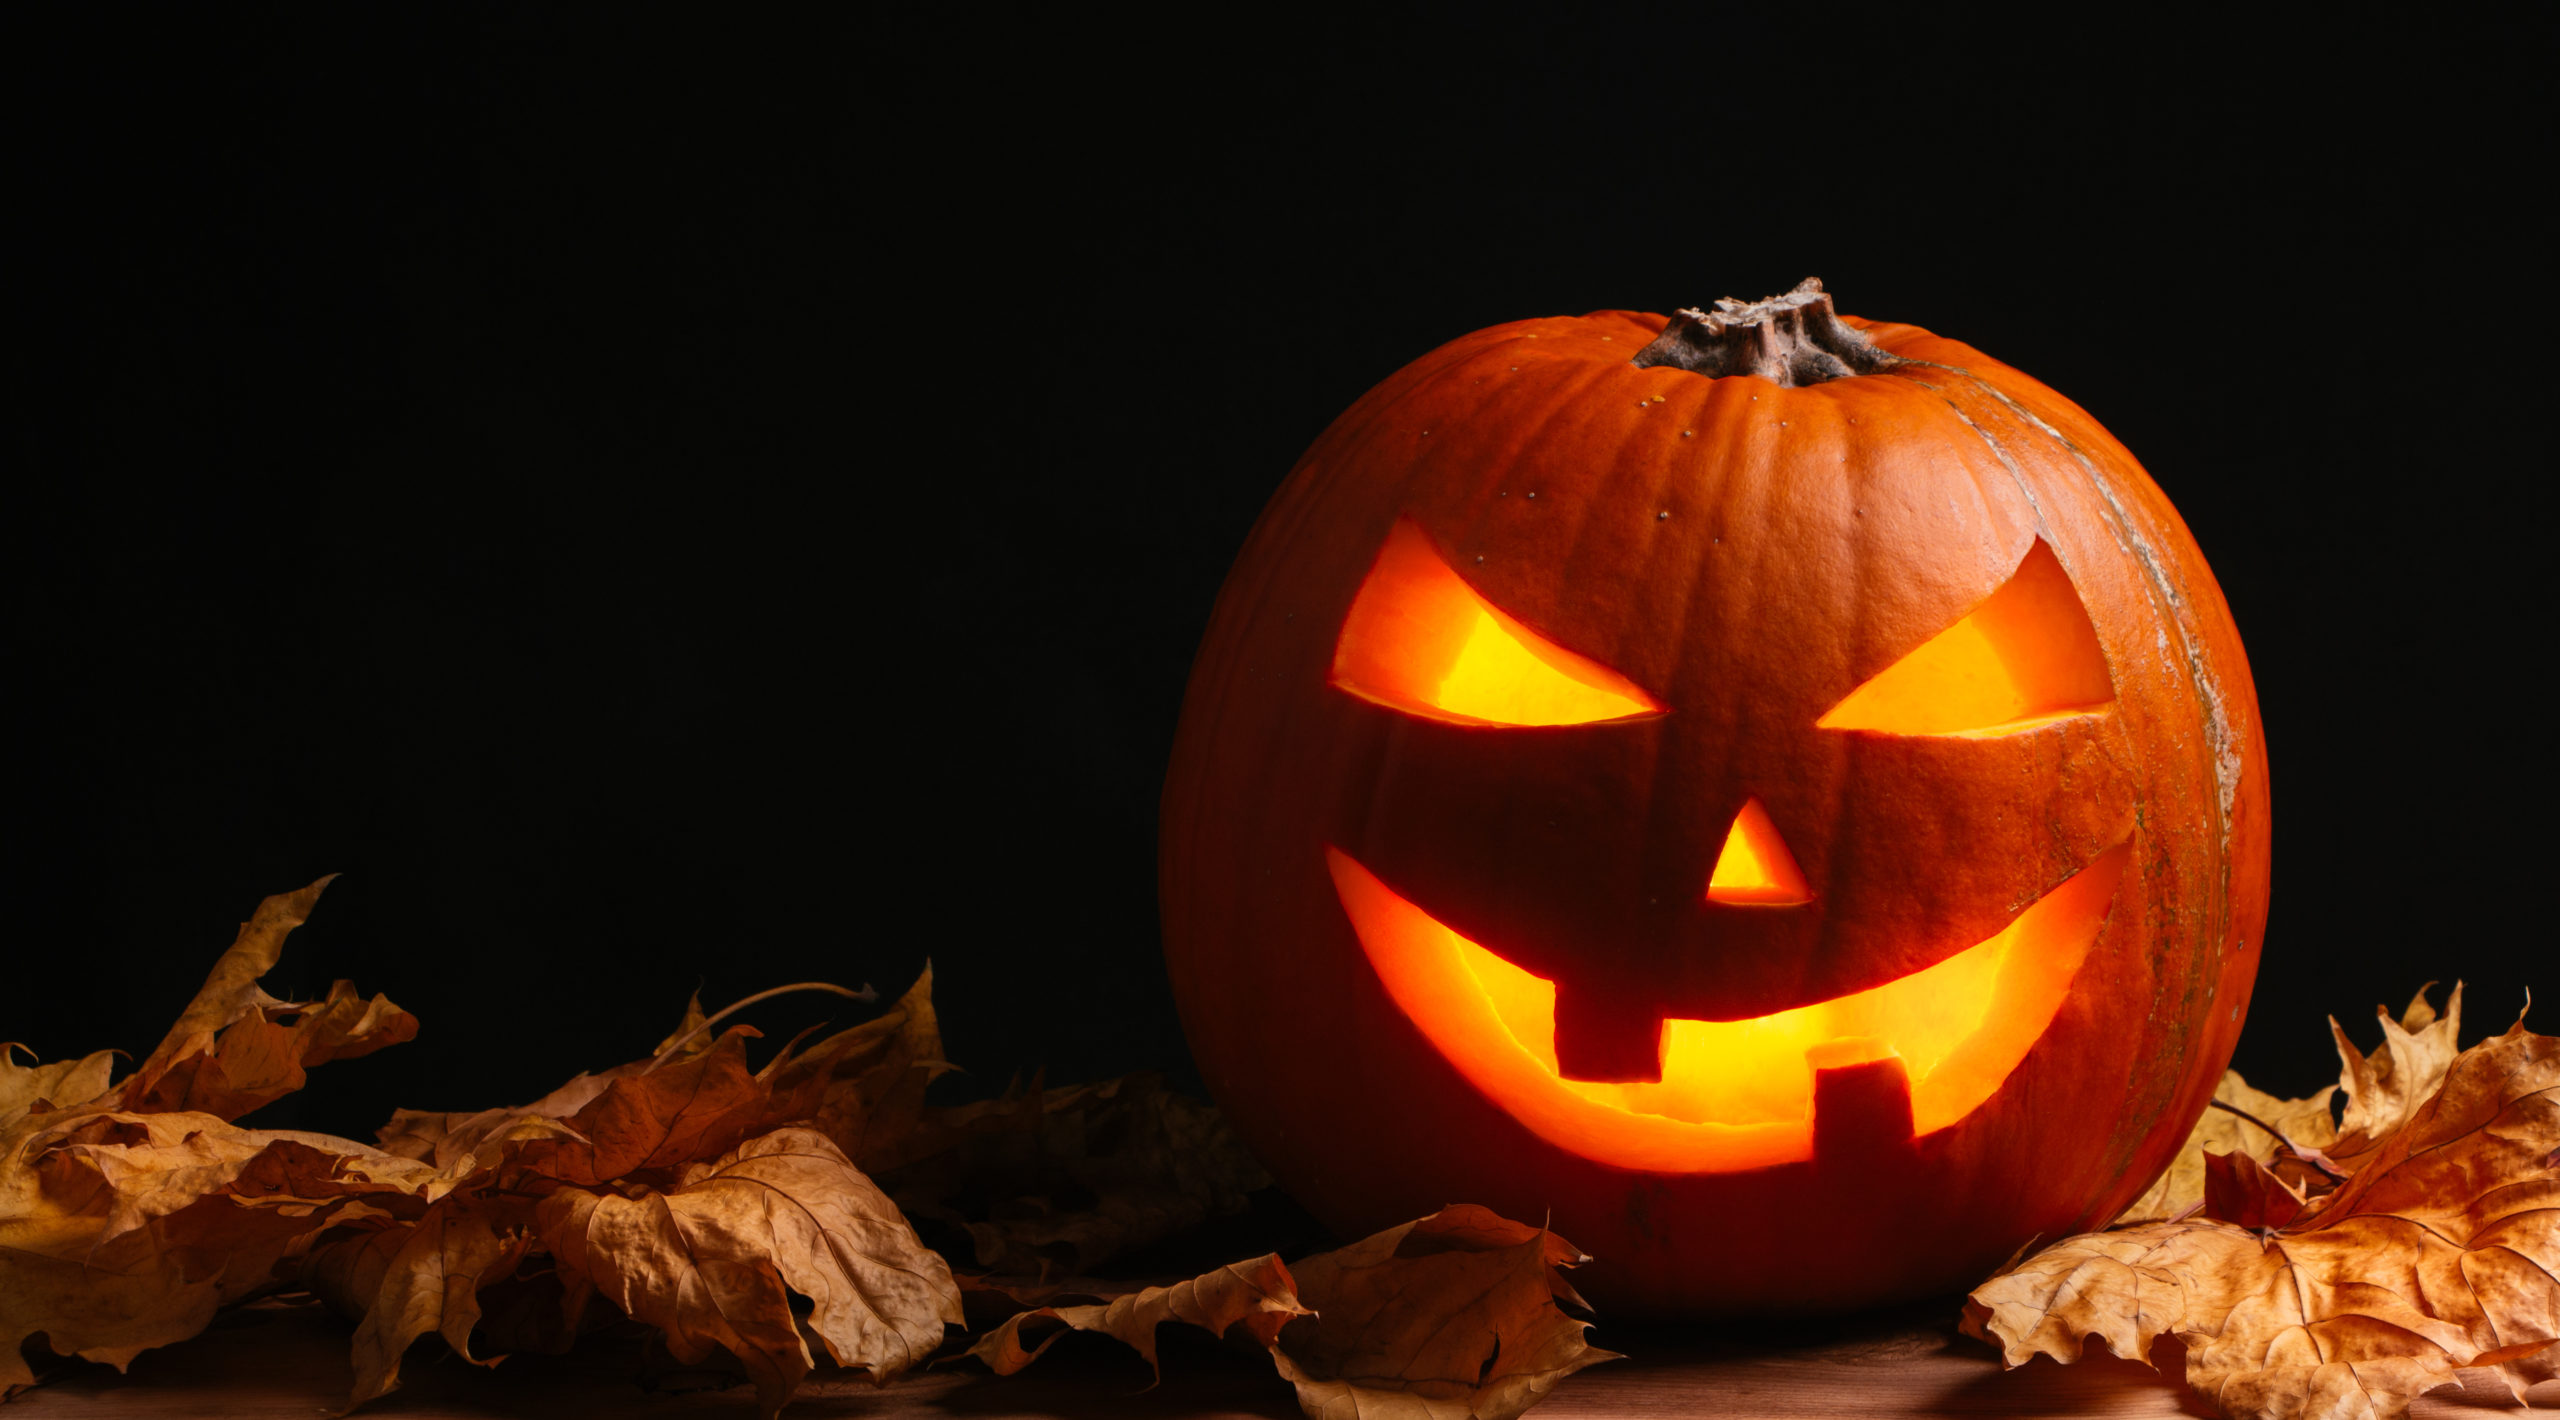 Know the Halloween Injury Risks